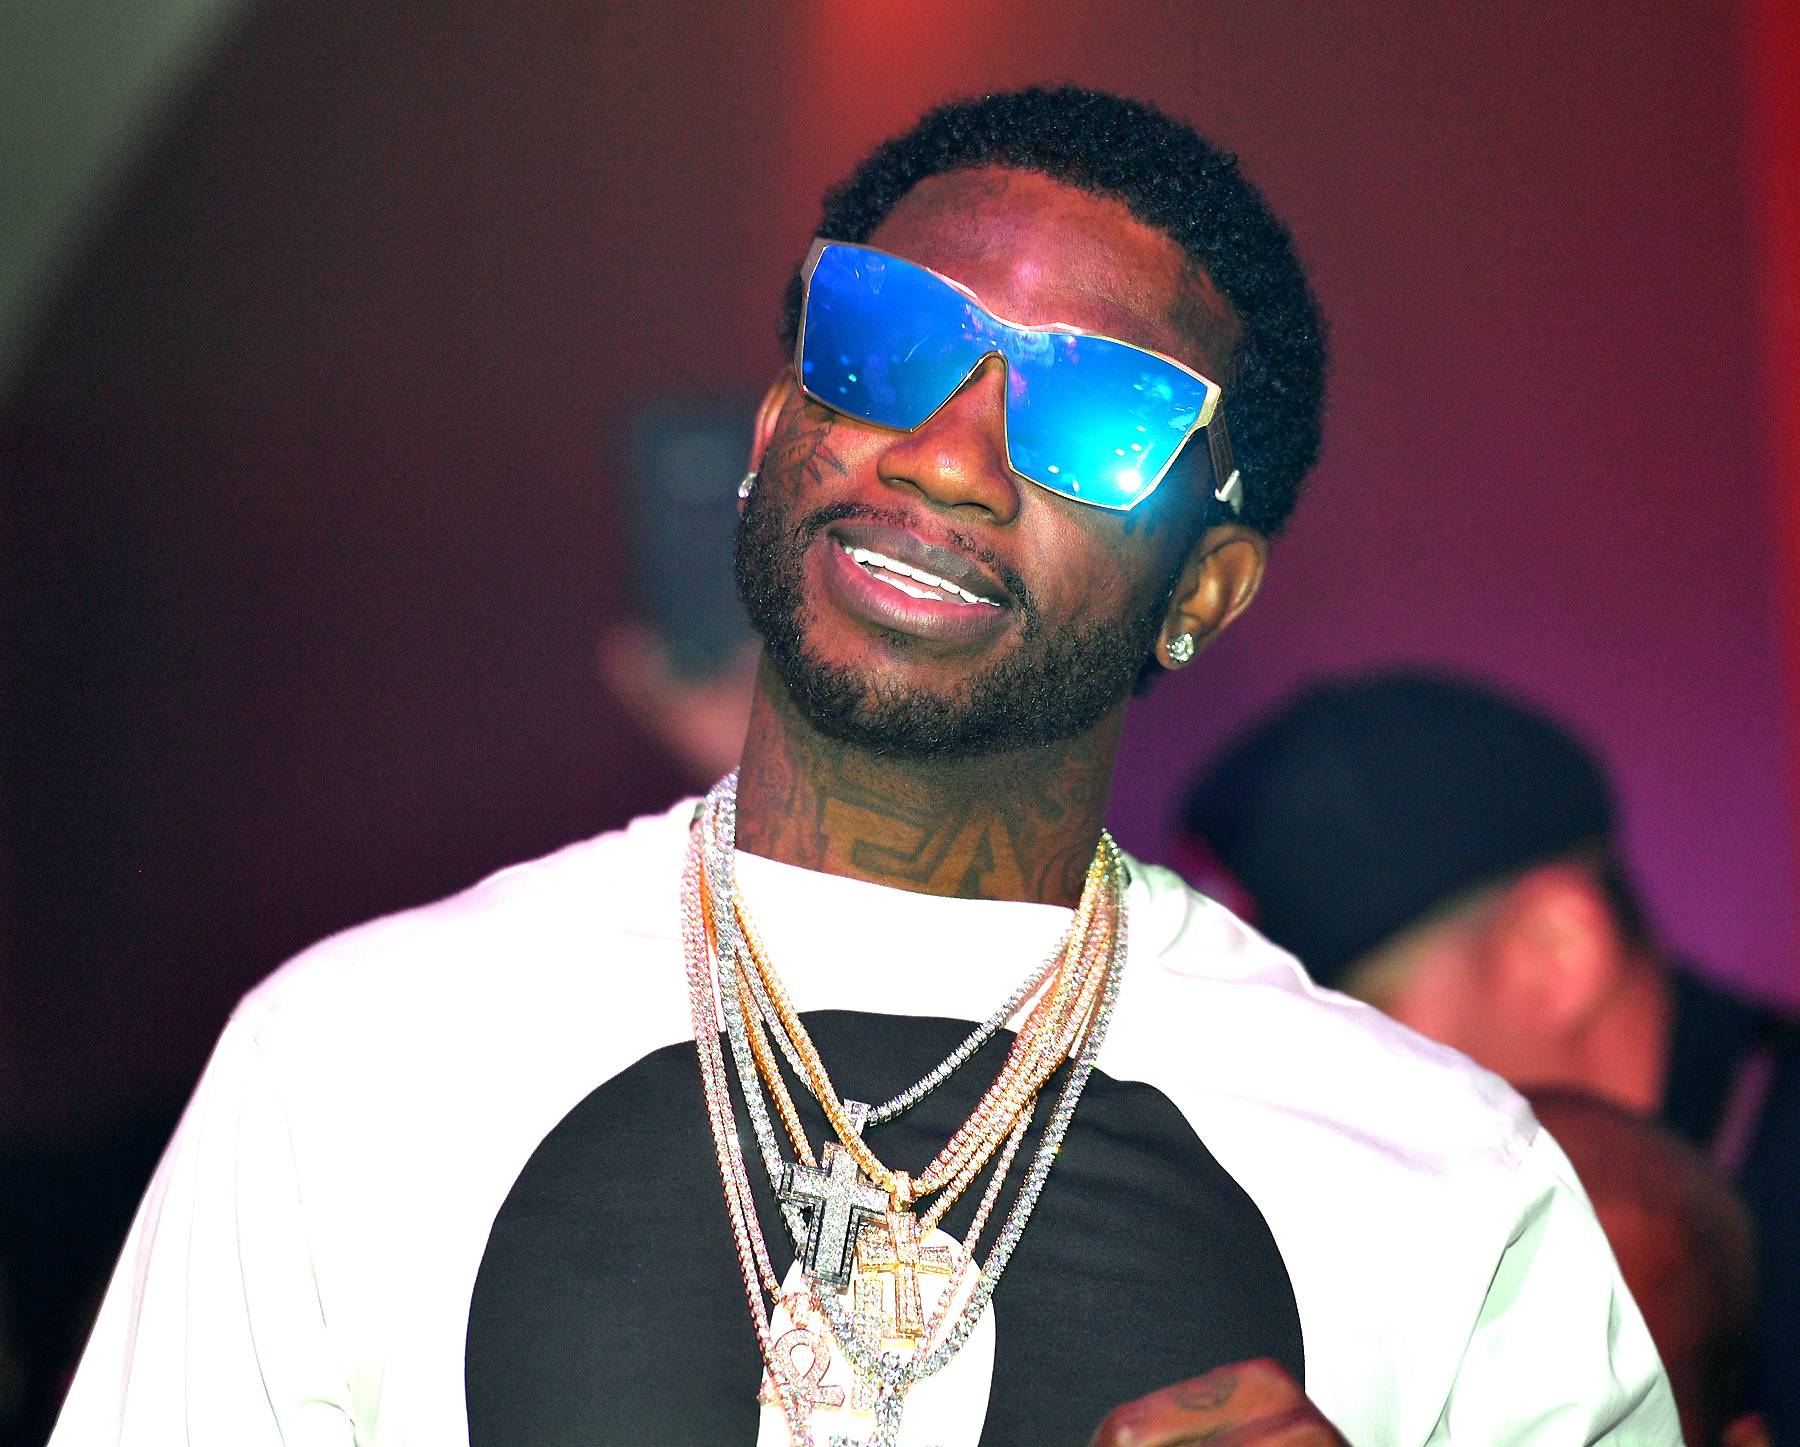 Gucci Mane Announces New Deal With Gucci